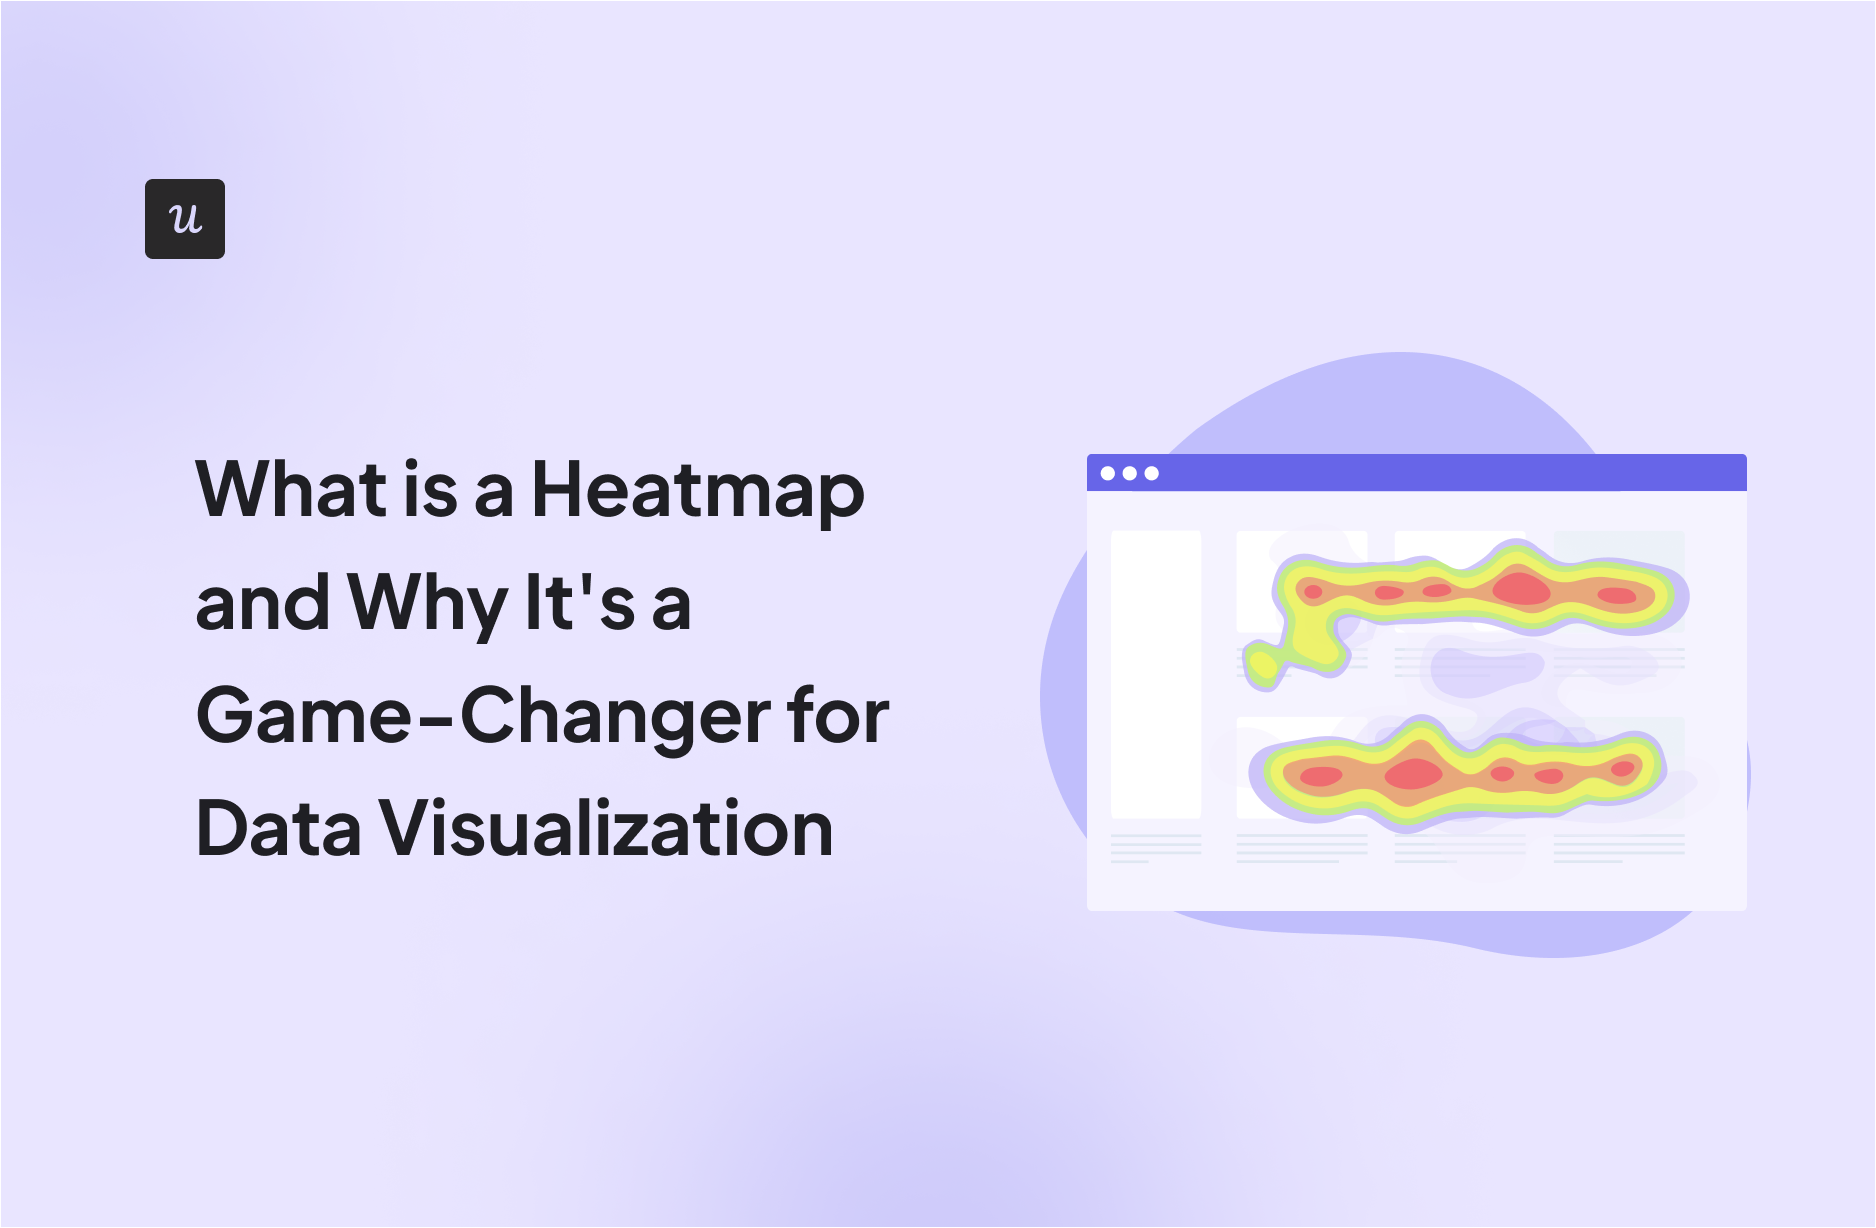 What is a Heatmap and Why It's a Game-Changer for Data Visualization